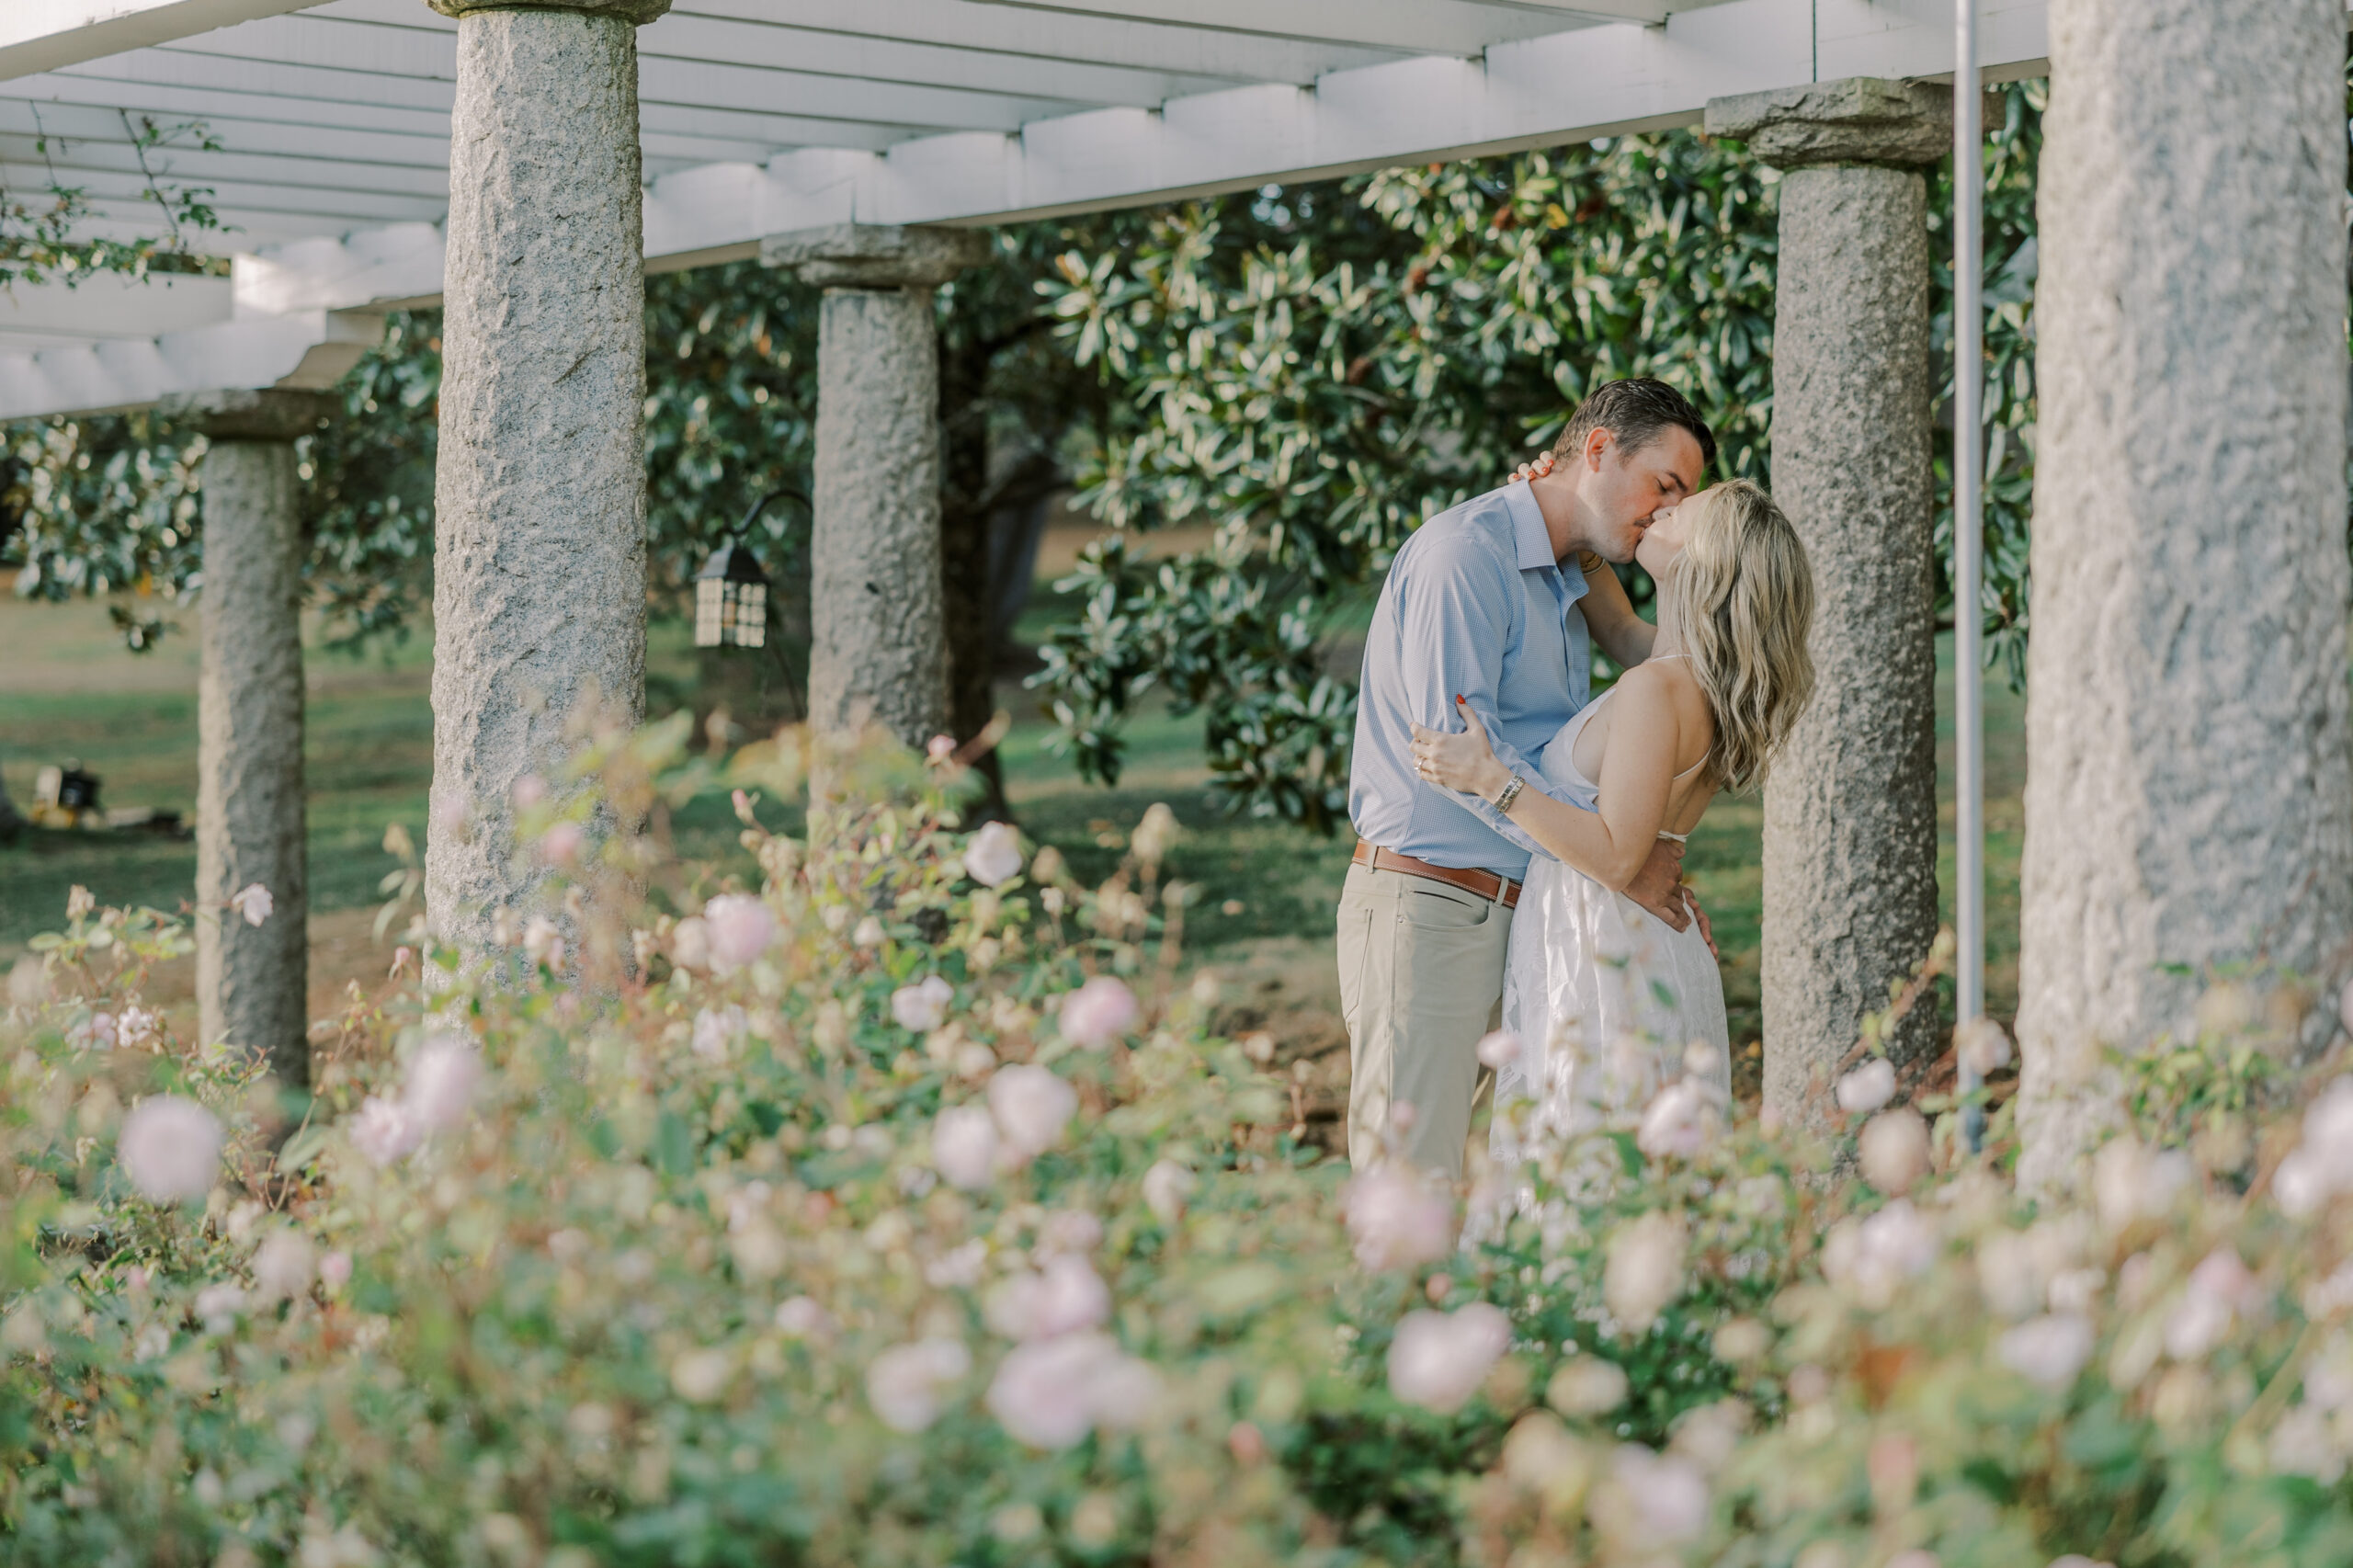 Man and woman kissing with stone columns, flowers and greenery around them